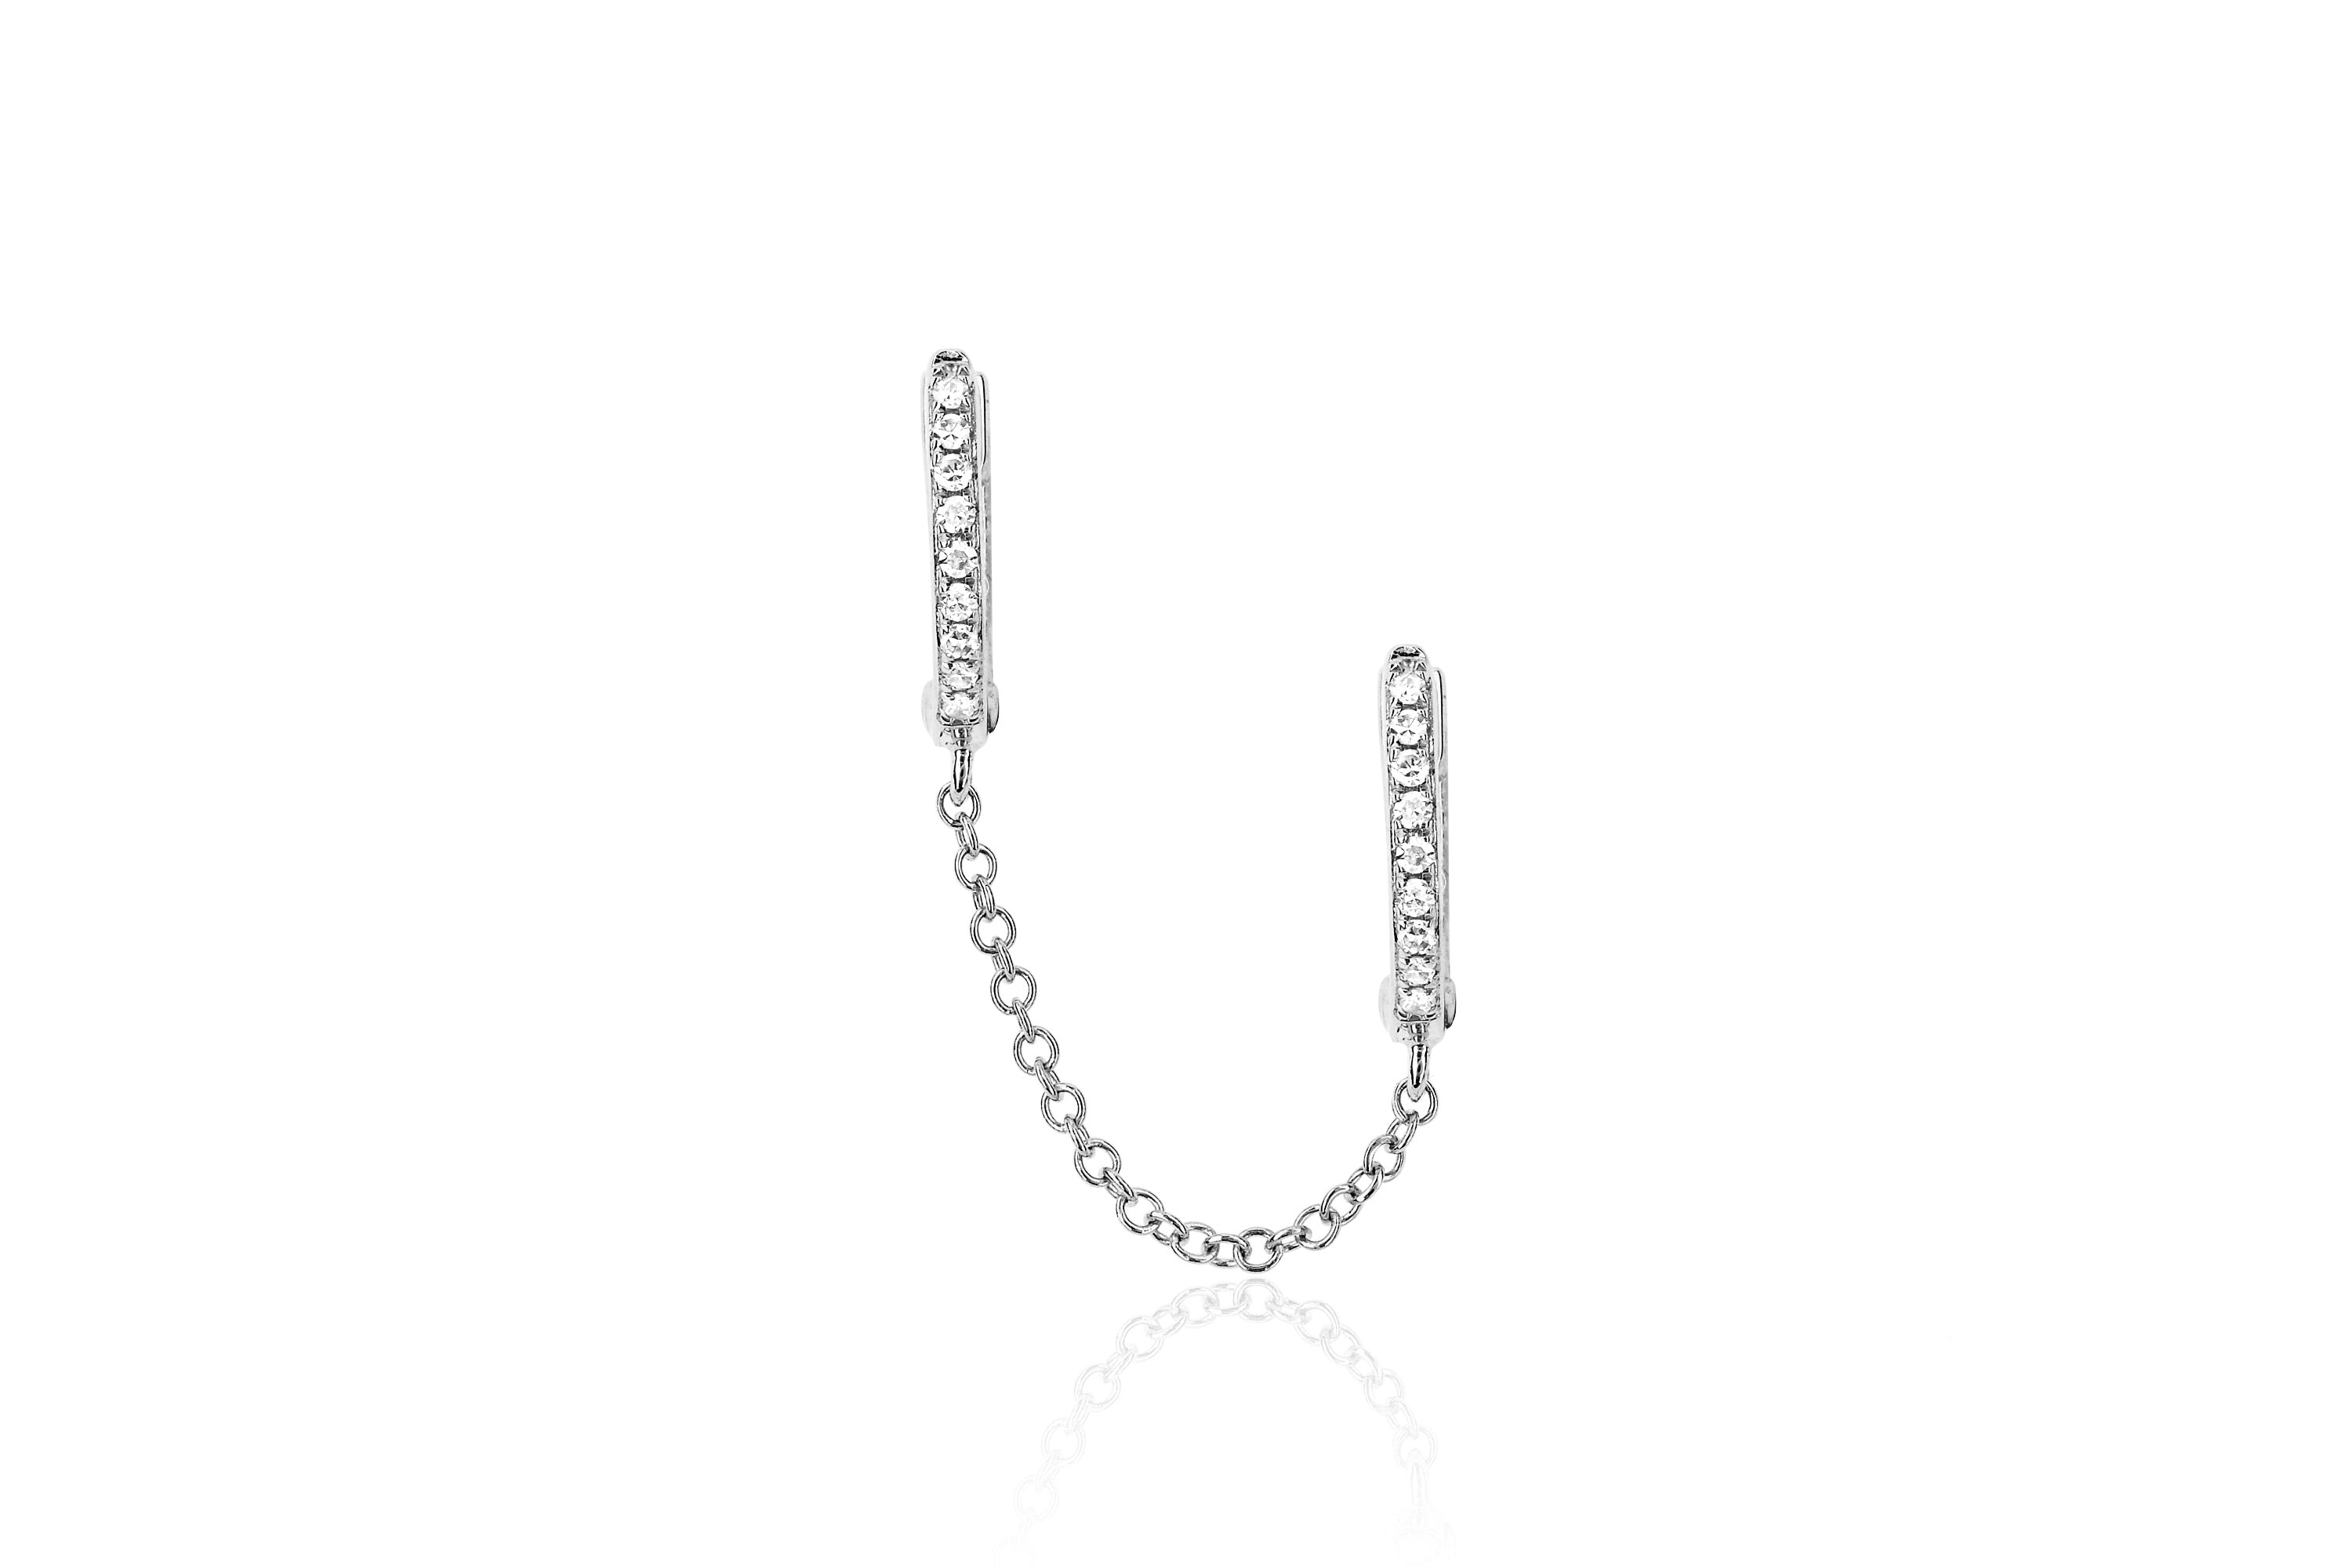 Diamond Double Huggie Chain Earring in 14k White Gold with Additional View of Earring